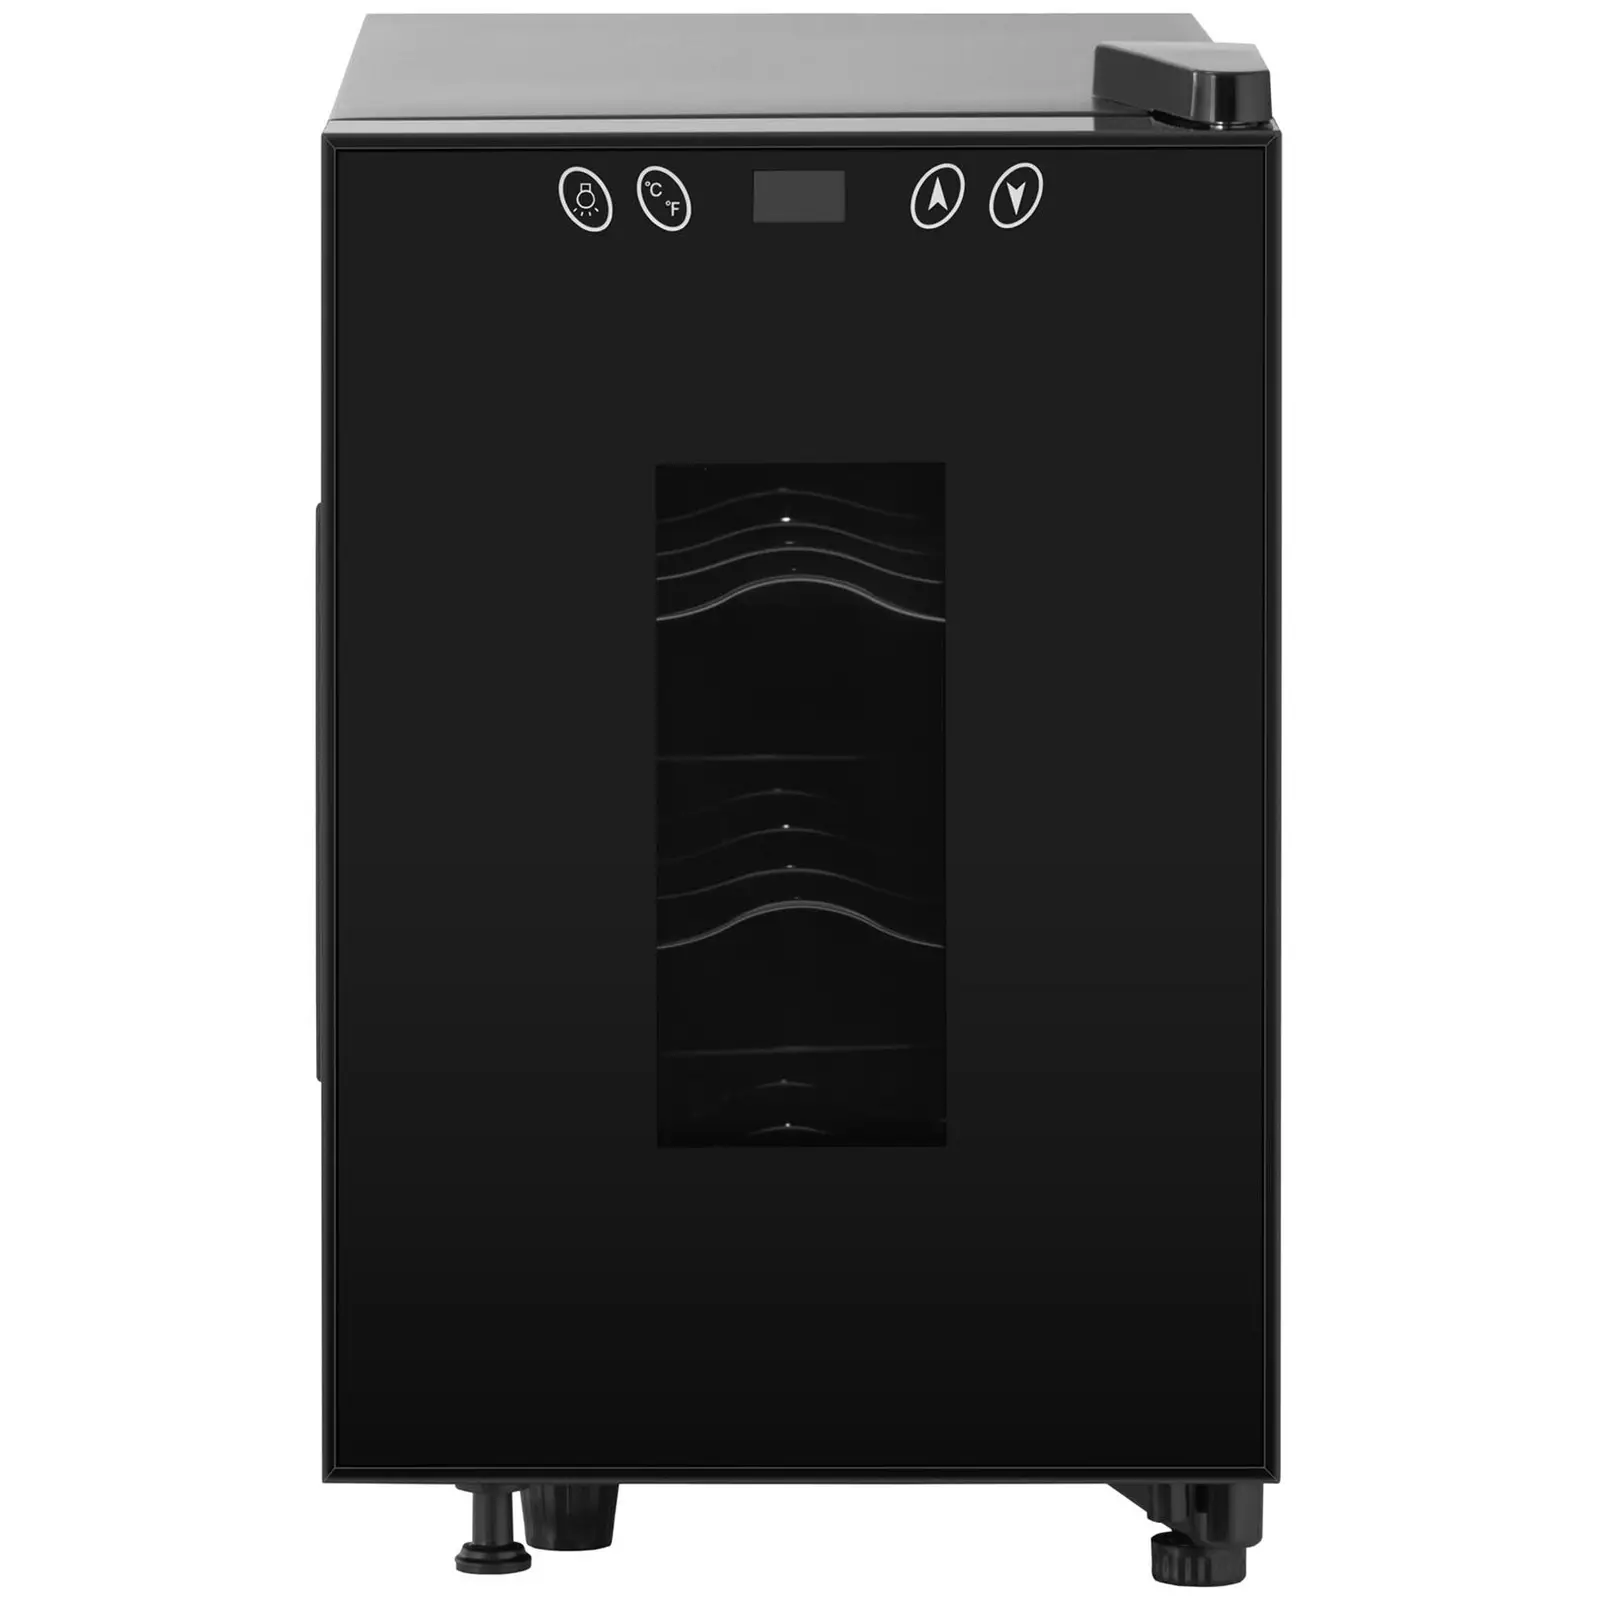 Counter Fridge - 17 L - Royal Catering - Steel